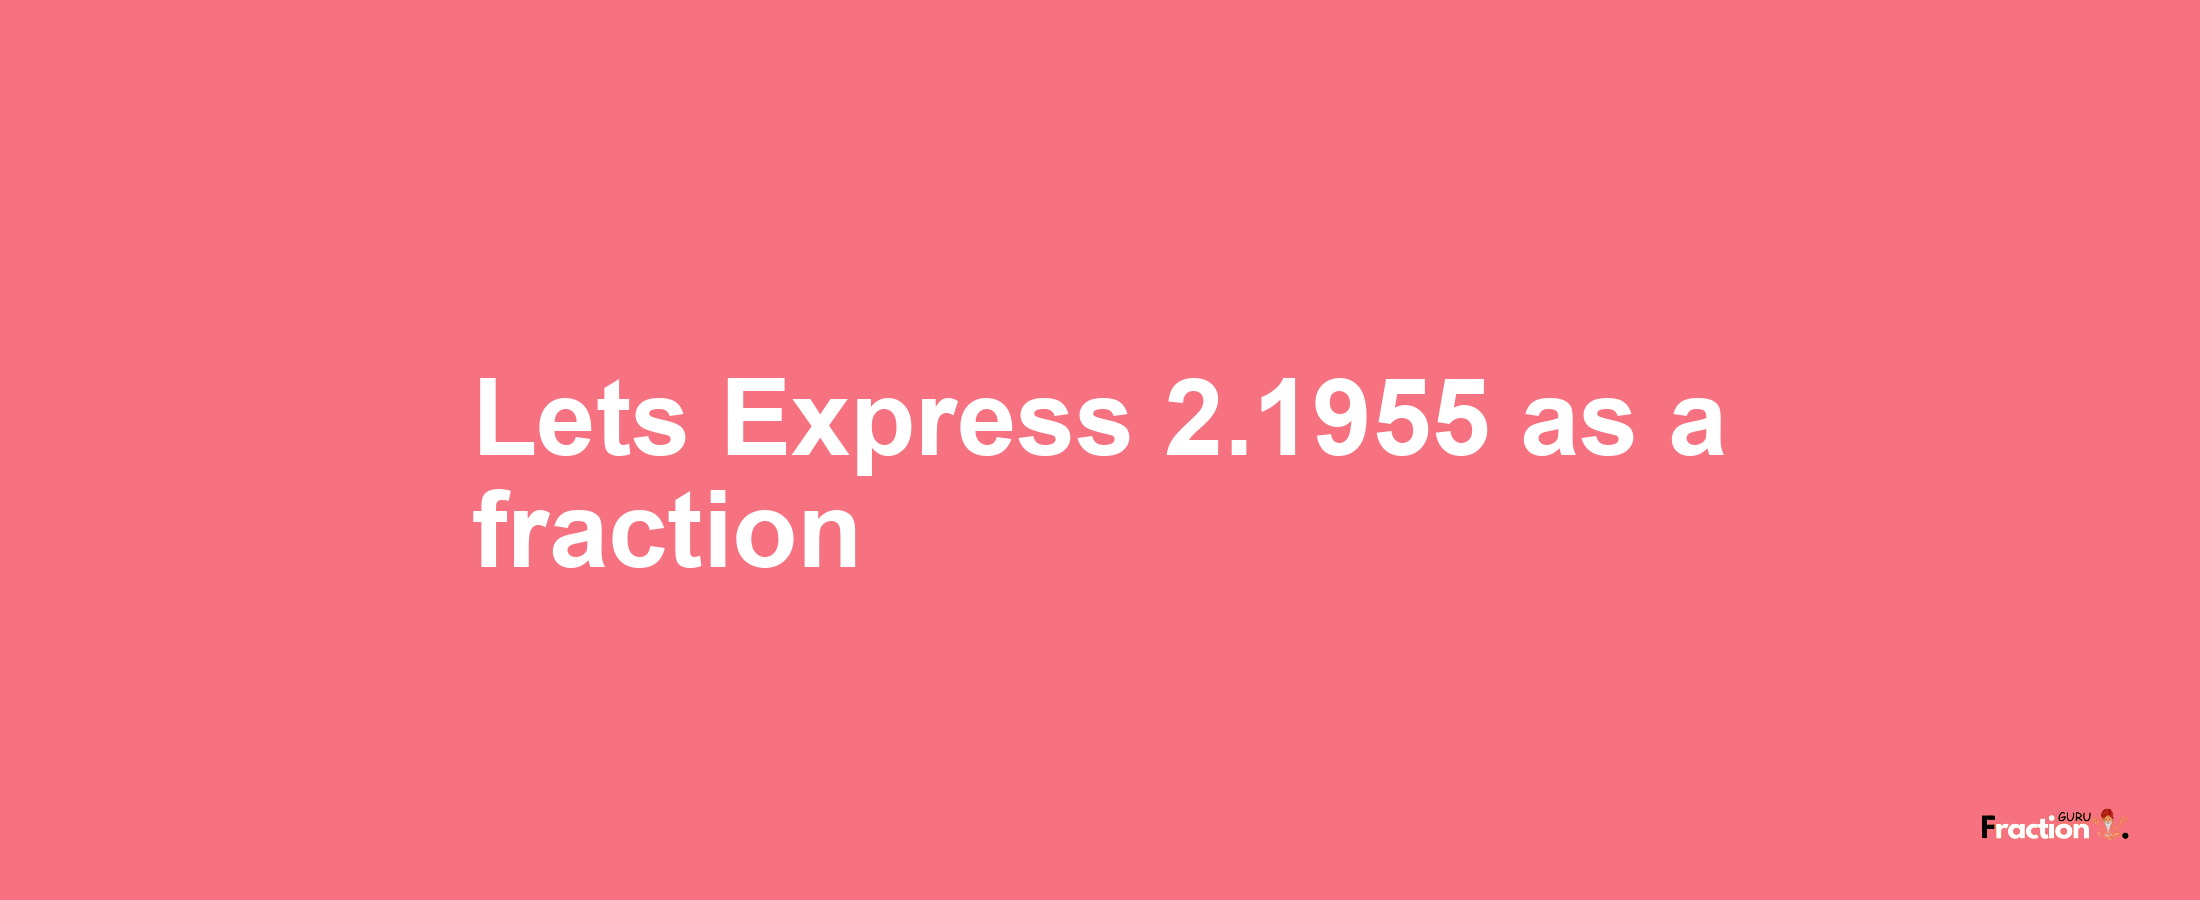 Lets Express 2.1955 as afraction